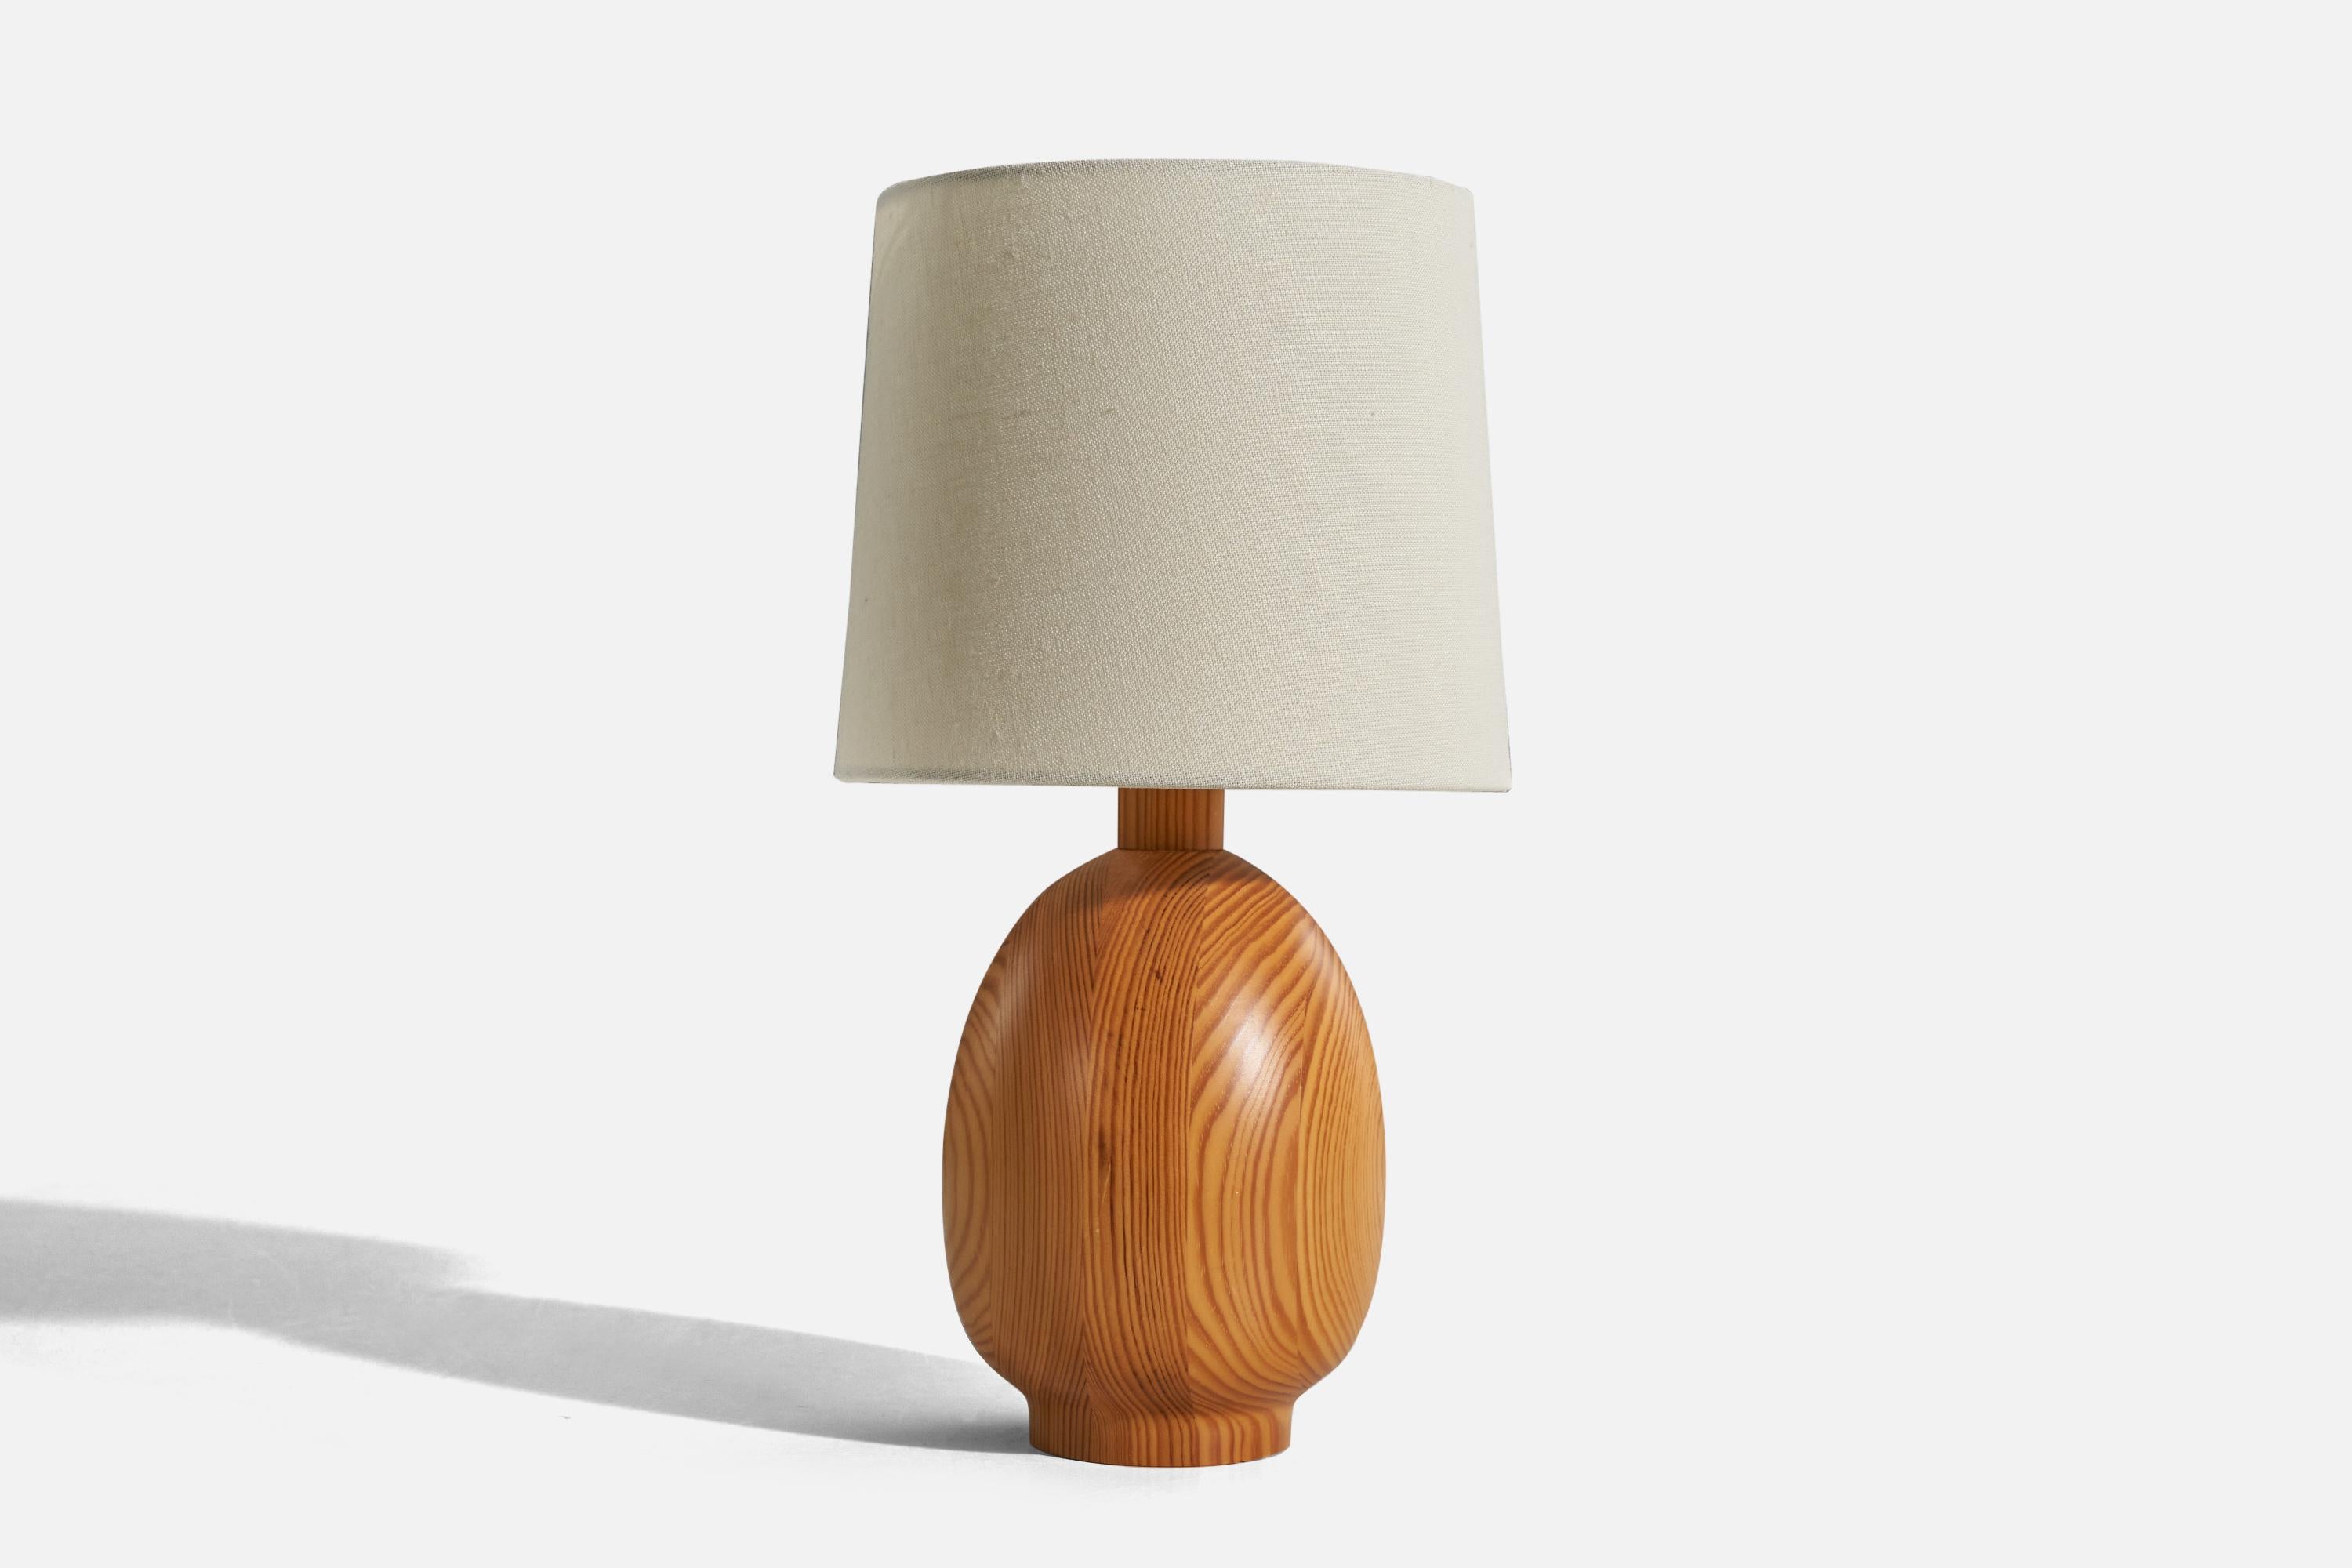 A solid pine table lamp designed and produced by Markslöjd, Kinna, Sweden, c. 1970s.

Sold without lampshade. 
Dimensions of Lamp (inches) : 11.31 x 5.5 x 5.5 (H x W x D)
Dimensions of Shade (inches) : 7 x 8 x 7 (T x B x S)
Dimension of Lamp